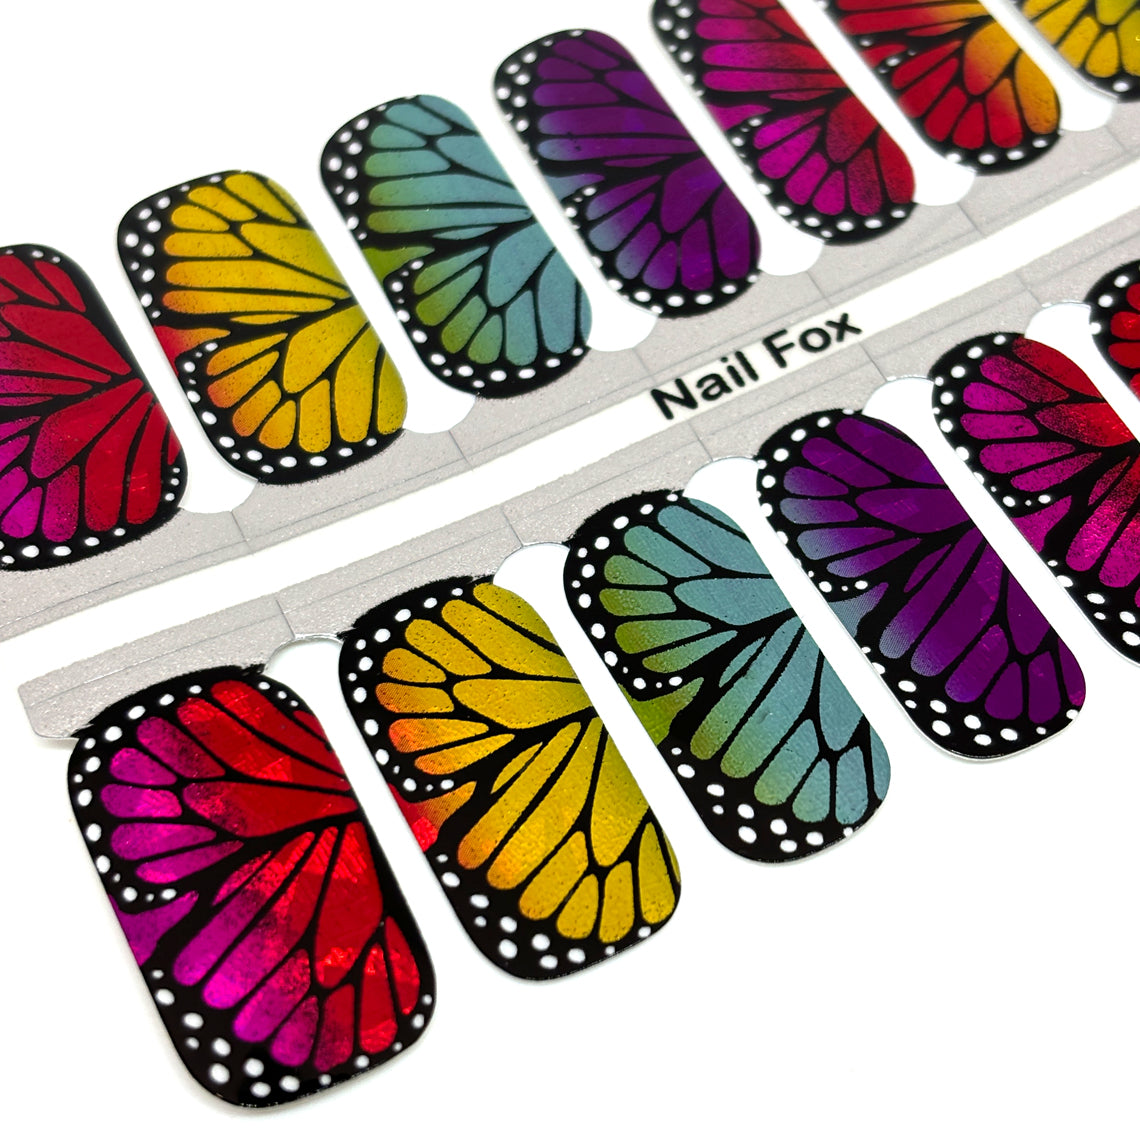 Winged Beauty Exclusive Design Nail Wraps (HOLO)